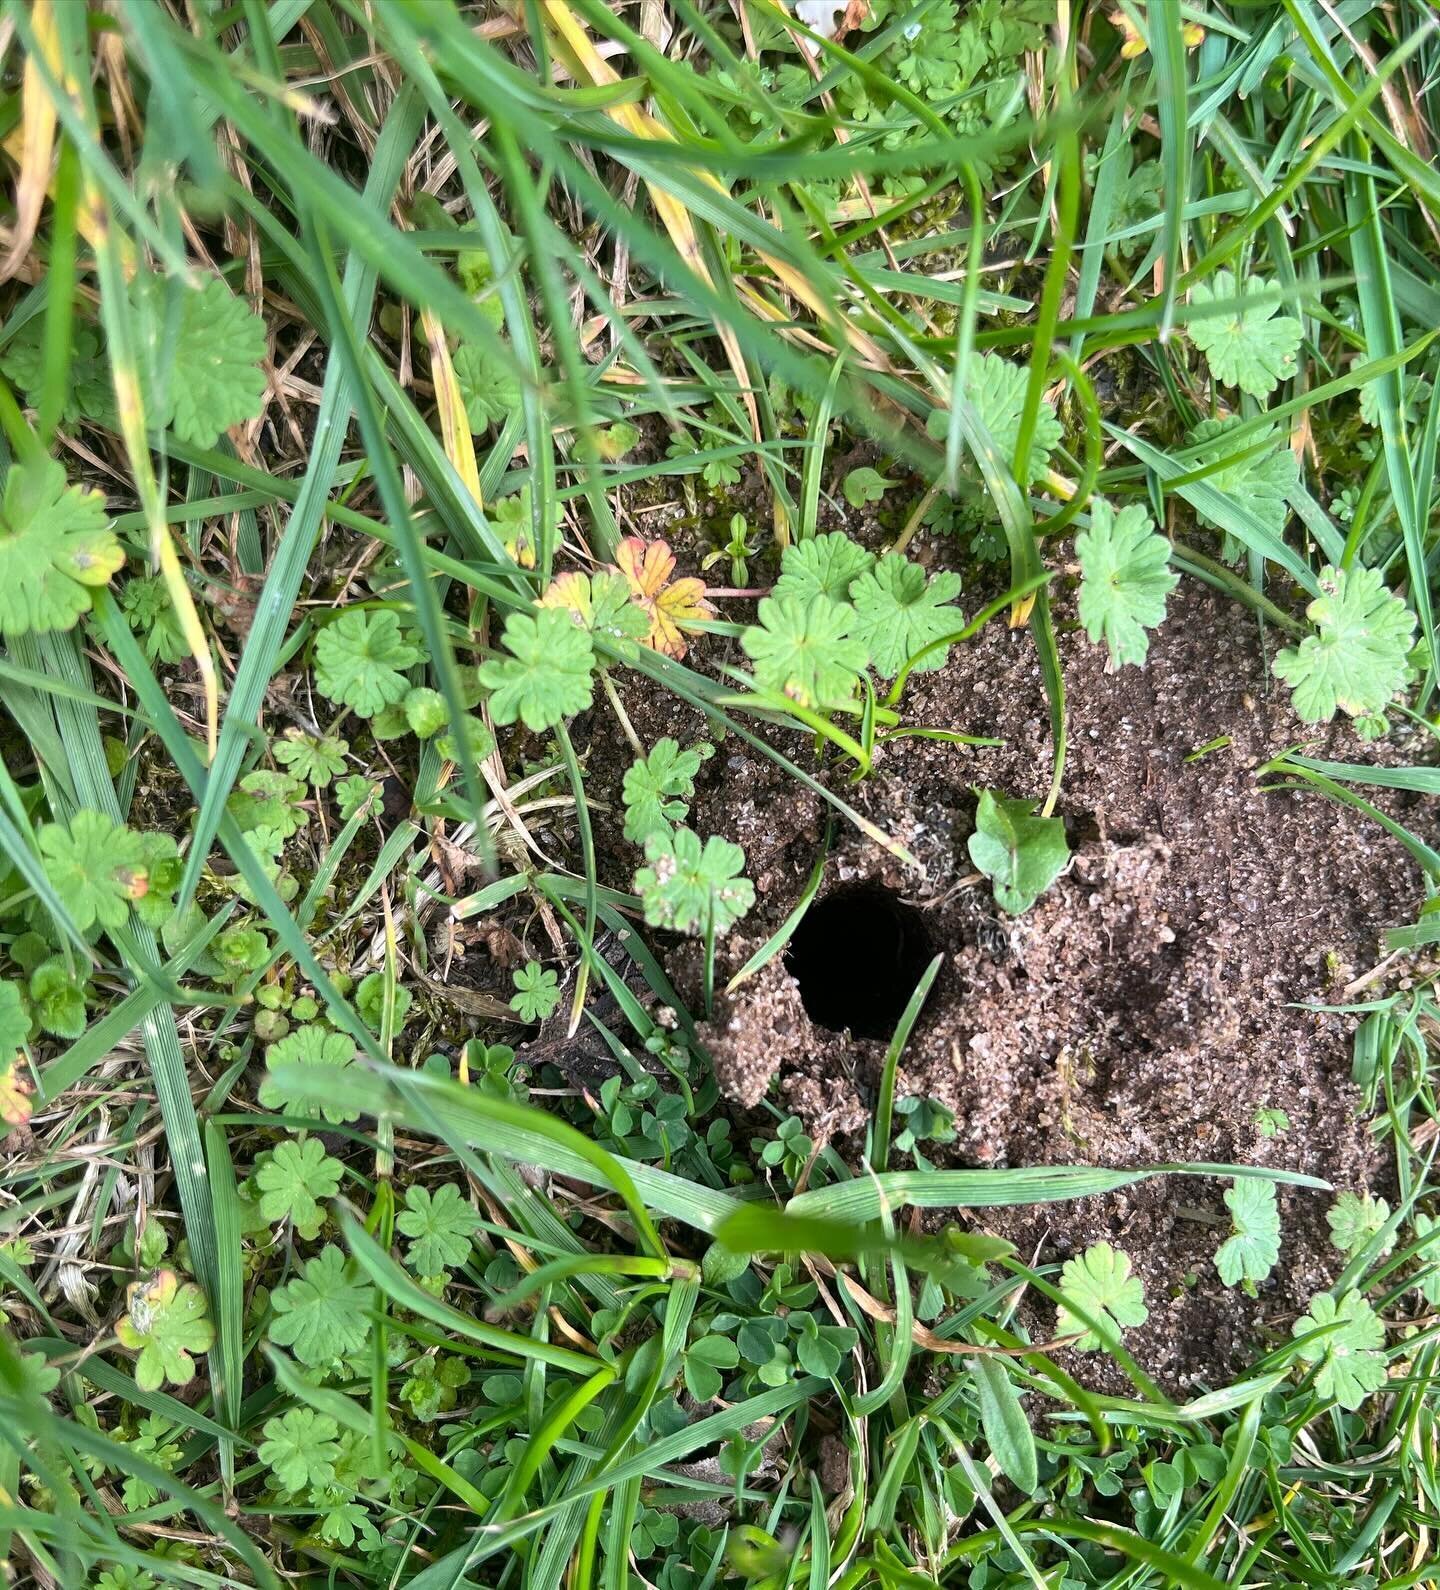 We have lots of these little holes around the garden and today I found out who&rsquo;s been making them! This is a Minotaur Beetle, a tunnelling dung beetle.  Just read that their tunnels can be 1.5m deep! This male (note the 3 horns) was busy workin